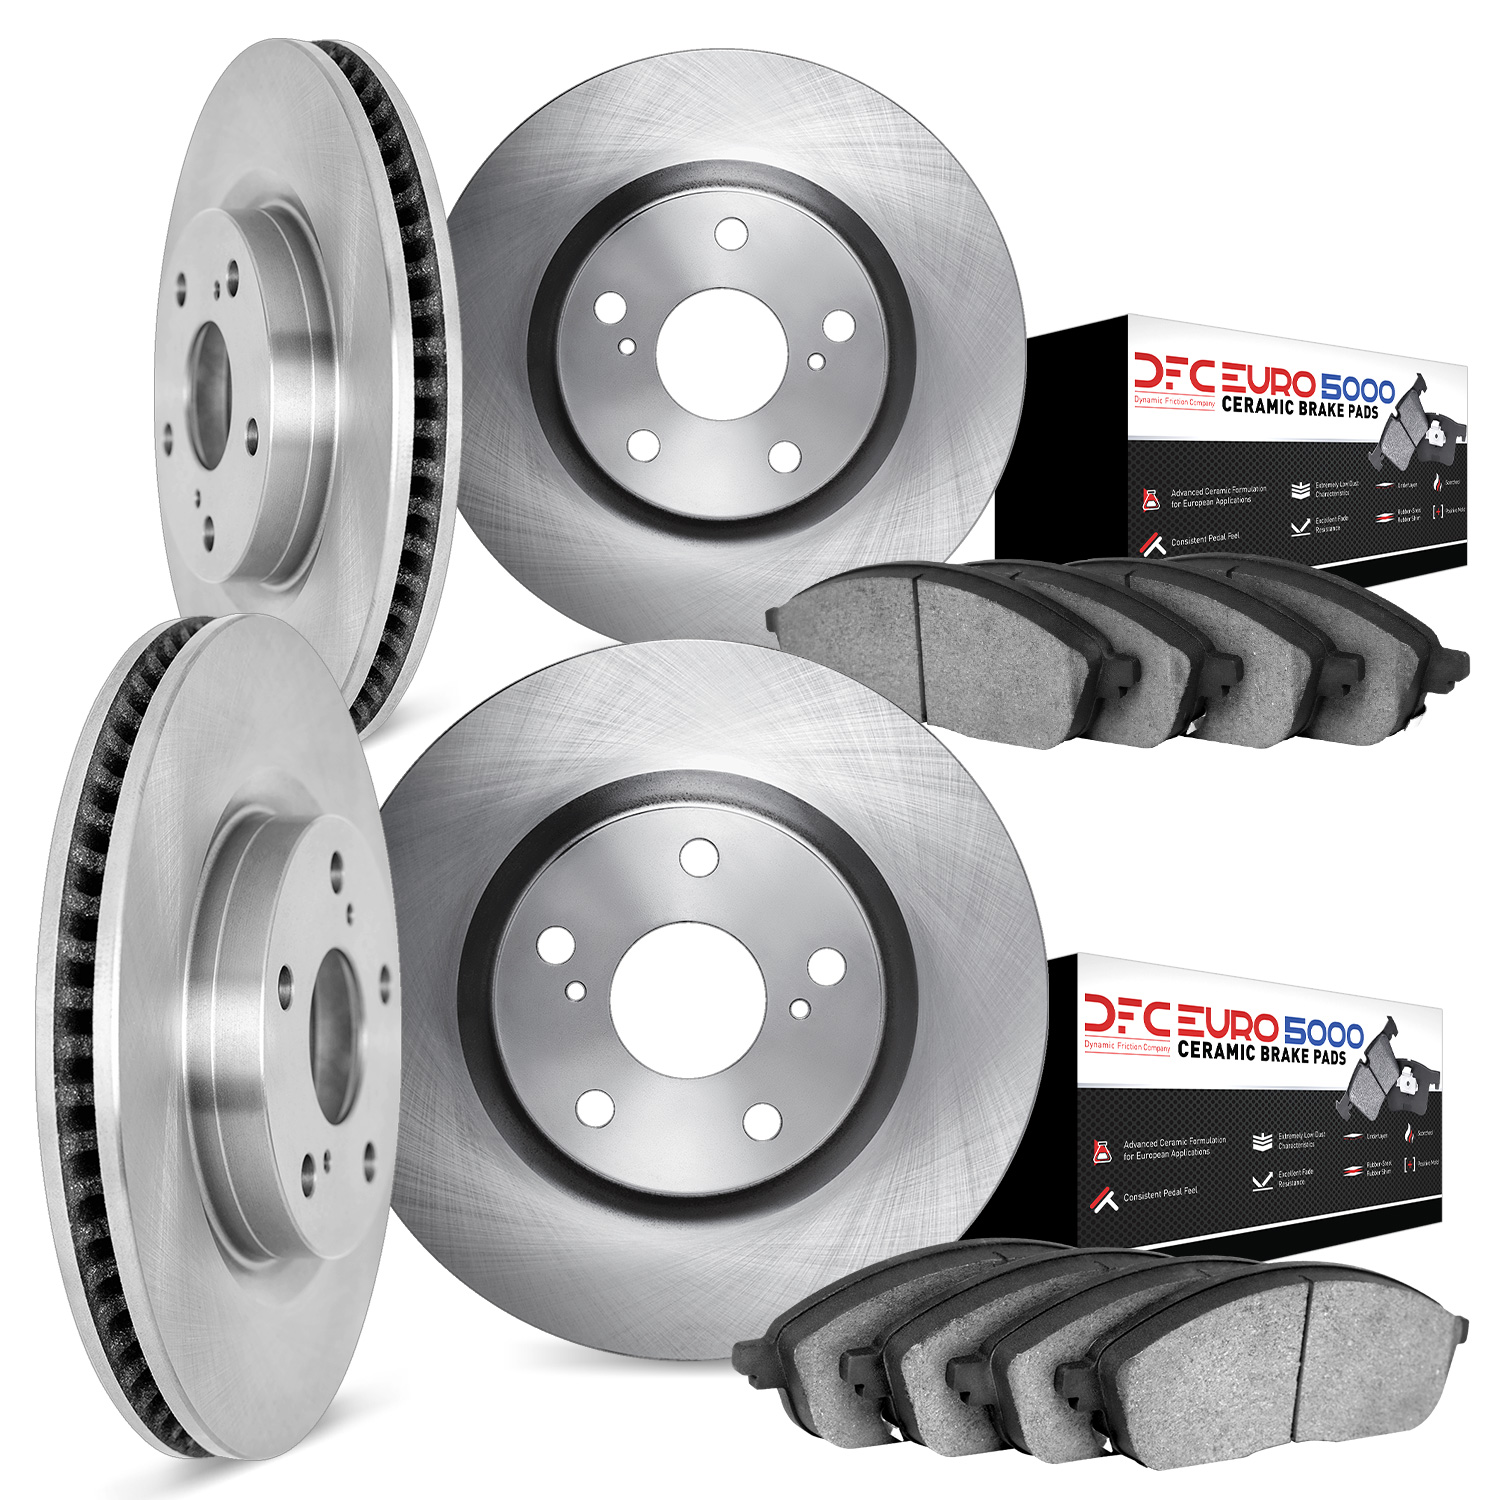 6604-31016 Brake Rotors w/5000 Euro Ceramic Brake Pads, 2001-2006 BMW, Position: Front and Rear